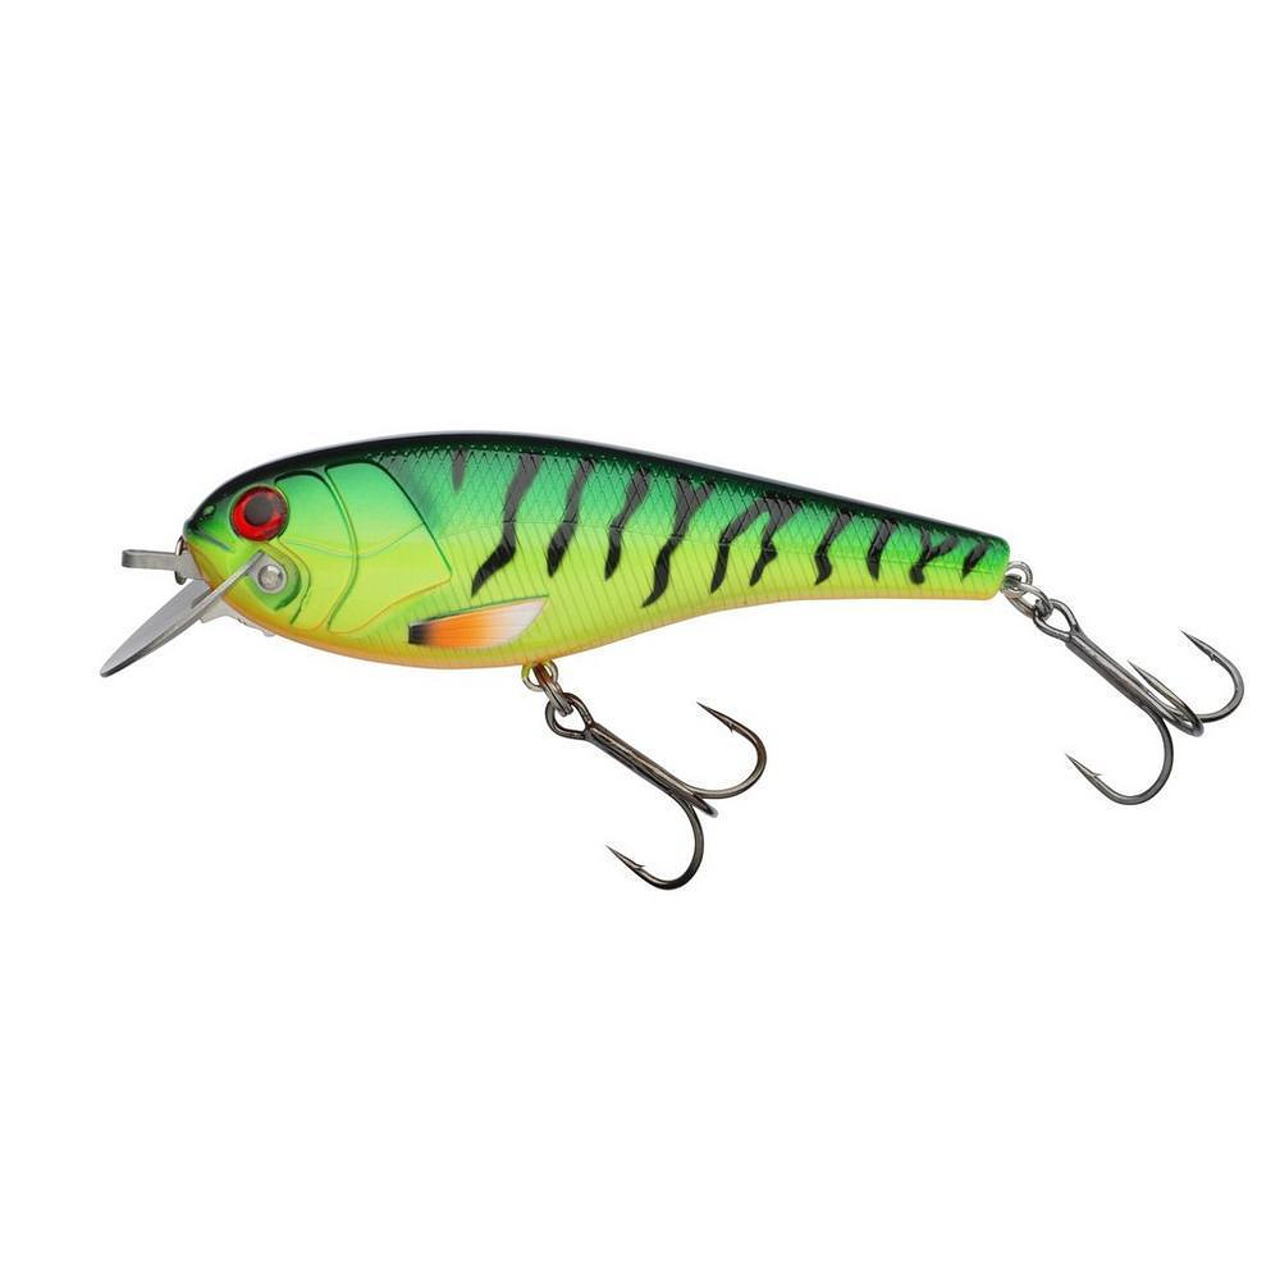 Hard Lure Abu Garcia BEAST HI-LO FLOATING 9cm ✴️️️ Diving lures - 4.50m ✓  TOP PRICE - Angling PRO Shop